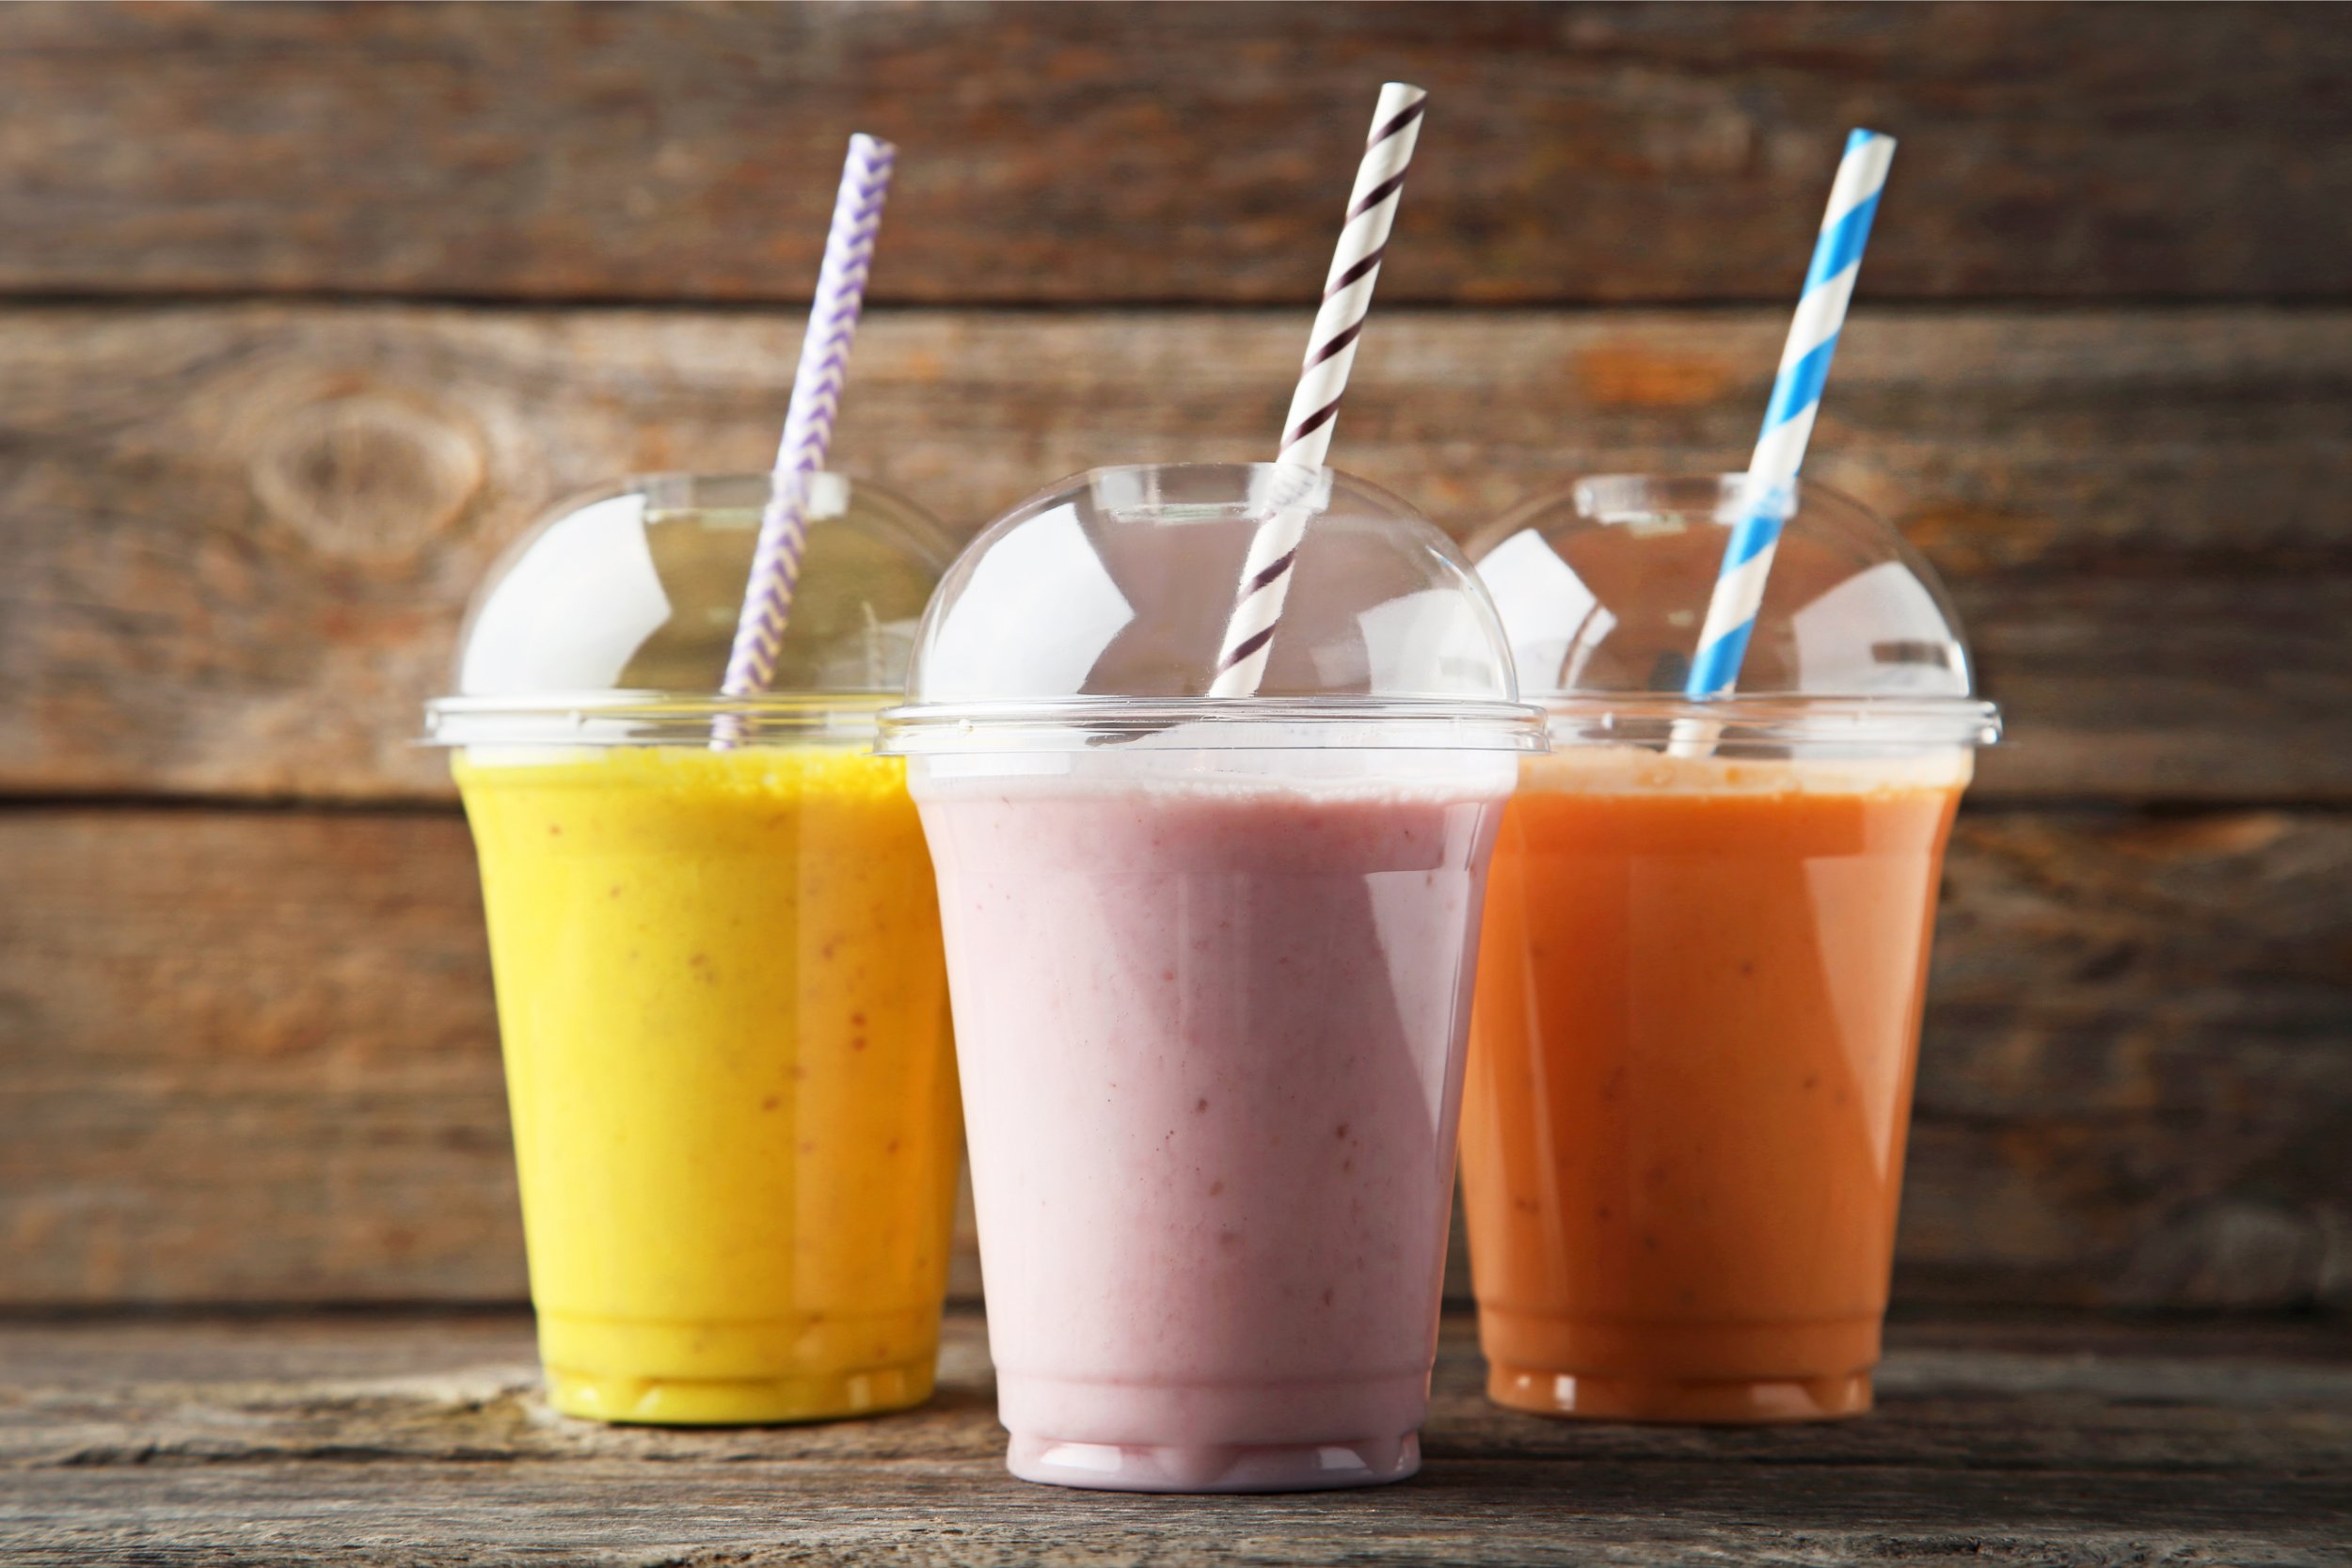 How to order a fresh smoothie at 7-Eleven – Japan Dictionary